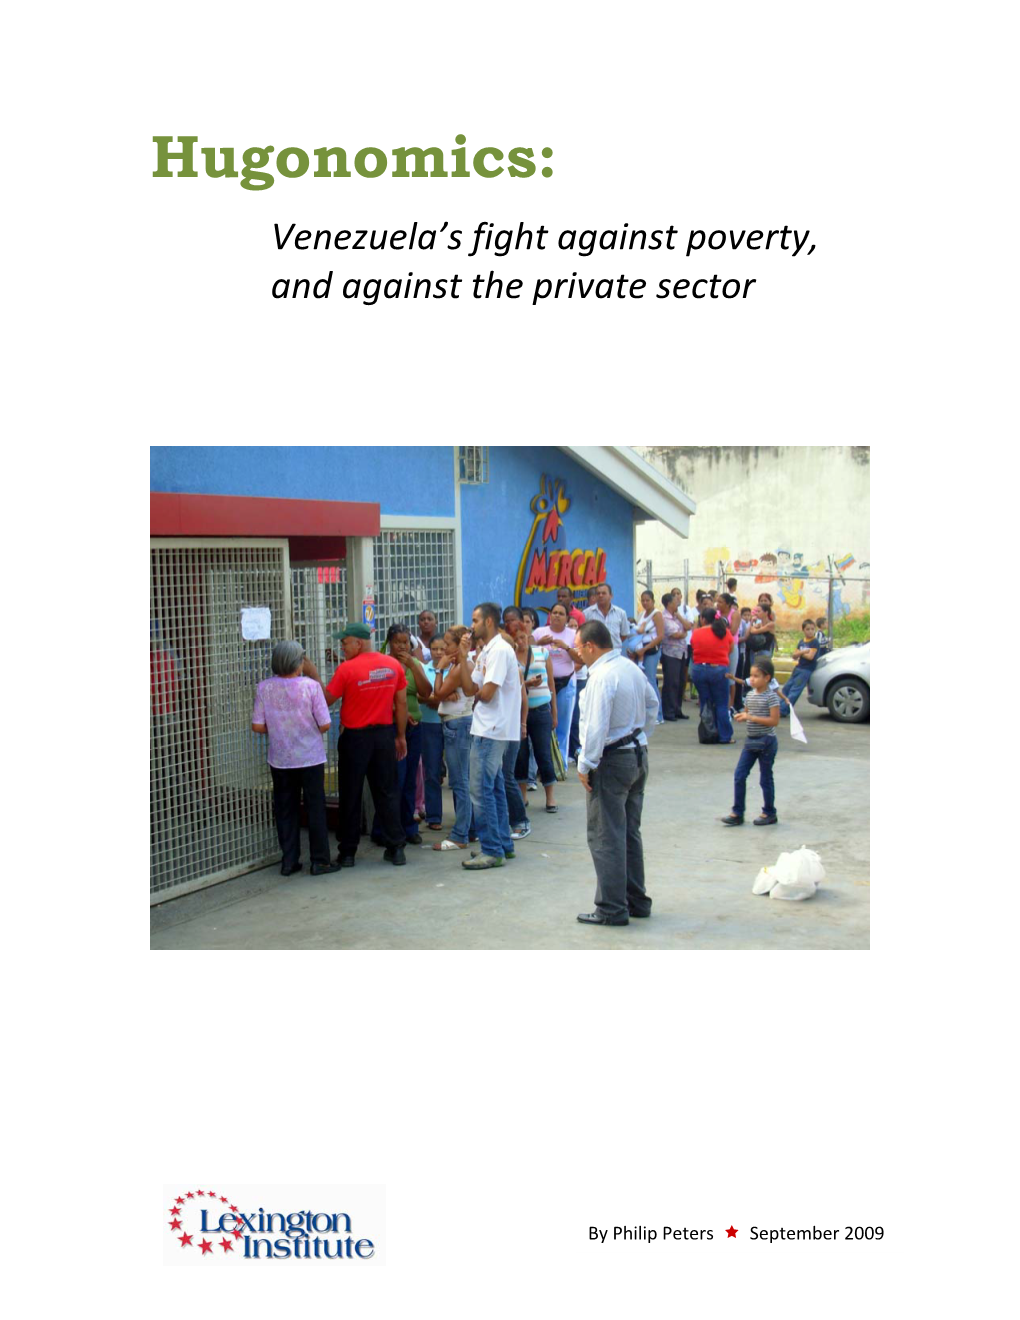 Hugonomics: Venezuela’S Fight Against Poverty, and Against the Private Sector